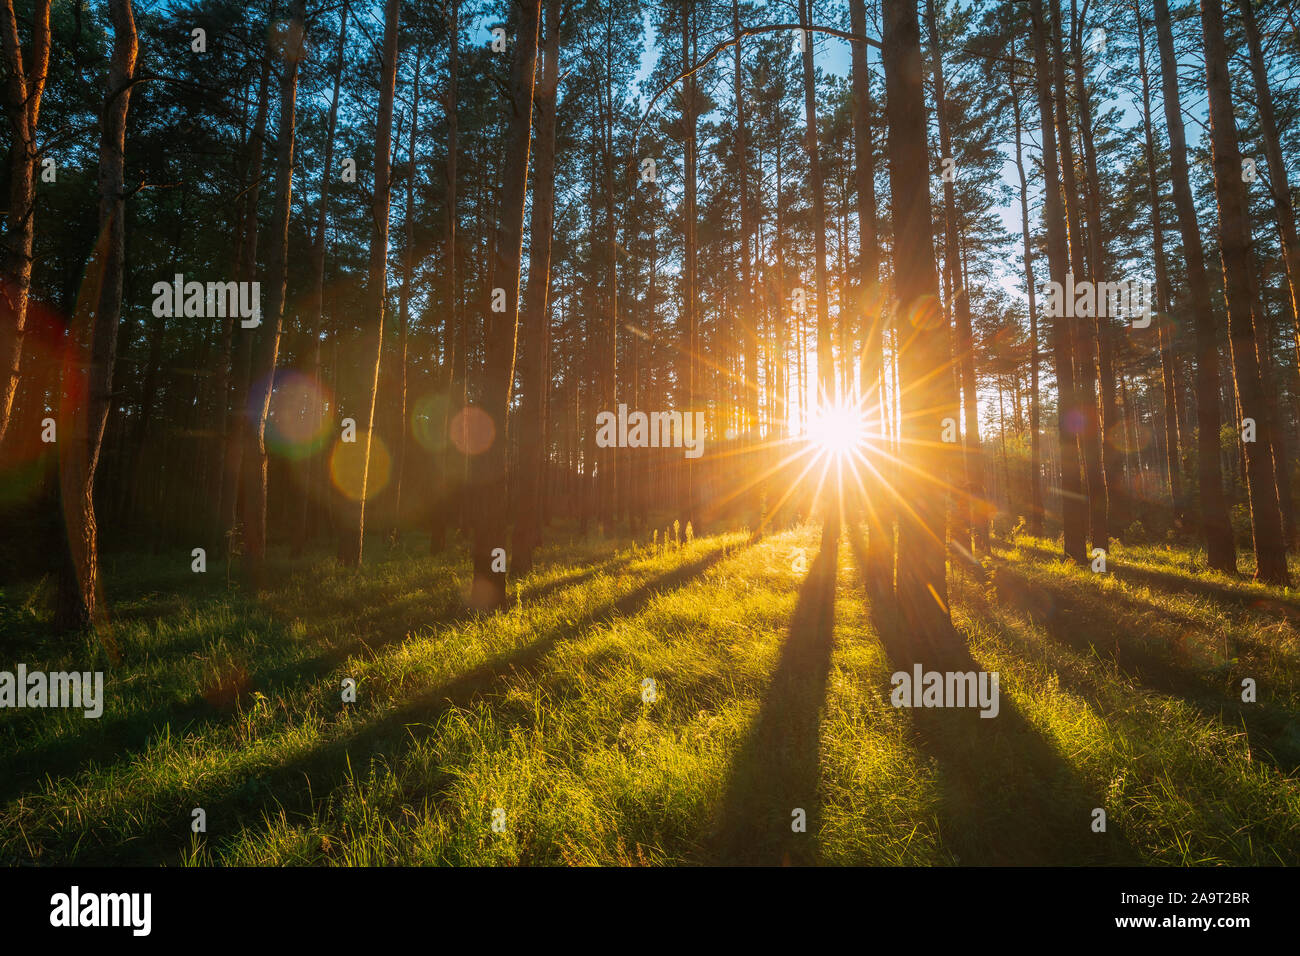 Sunset Sunrise Sun Sunshine In Sunny Summer Coniferous Forest. Sunlight Sunbeams Through Woods In Forest Landscape. Natural Lens Flares. Stock Photo